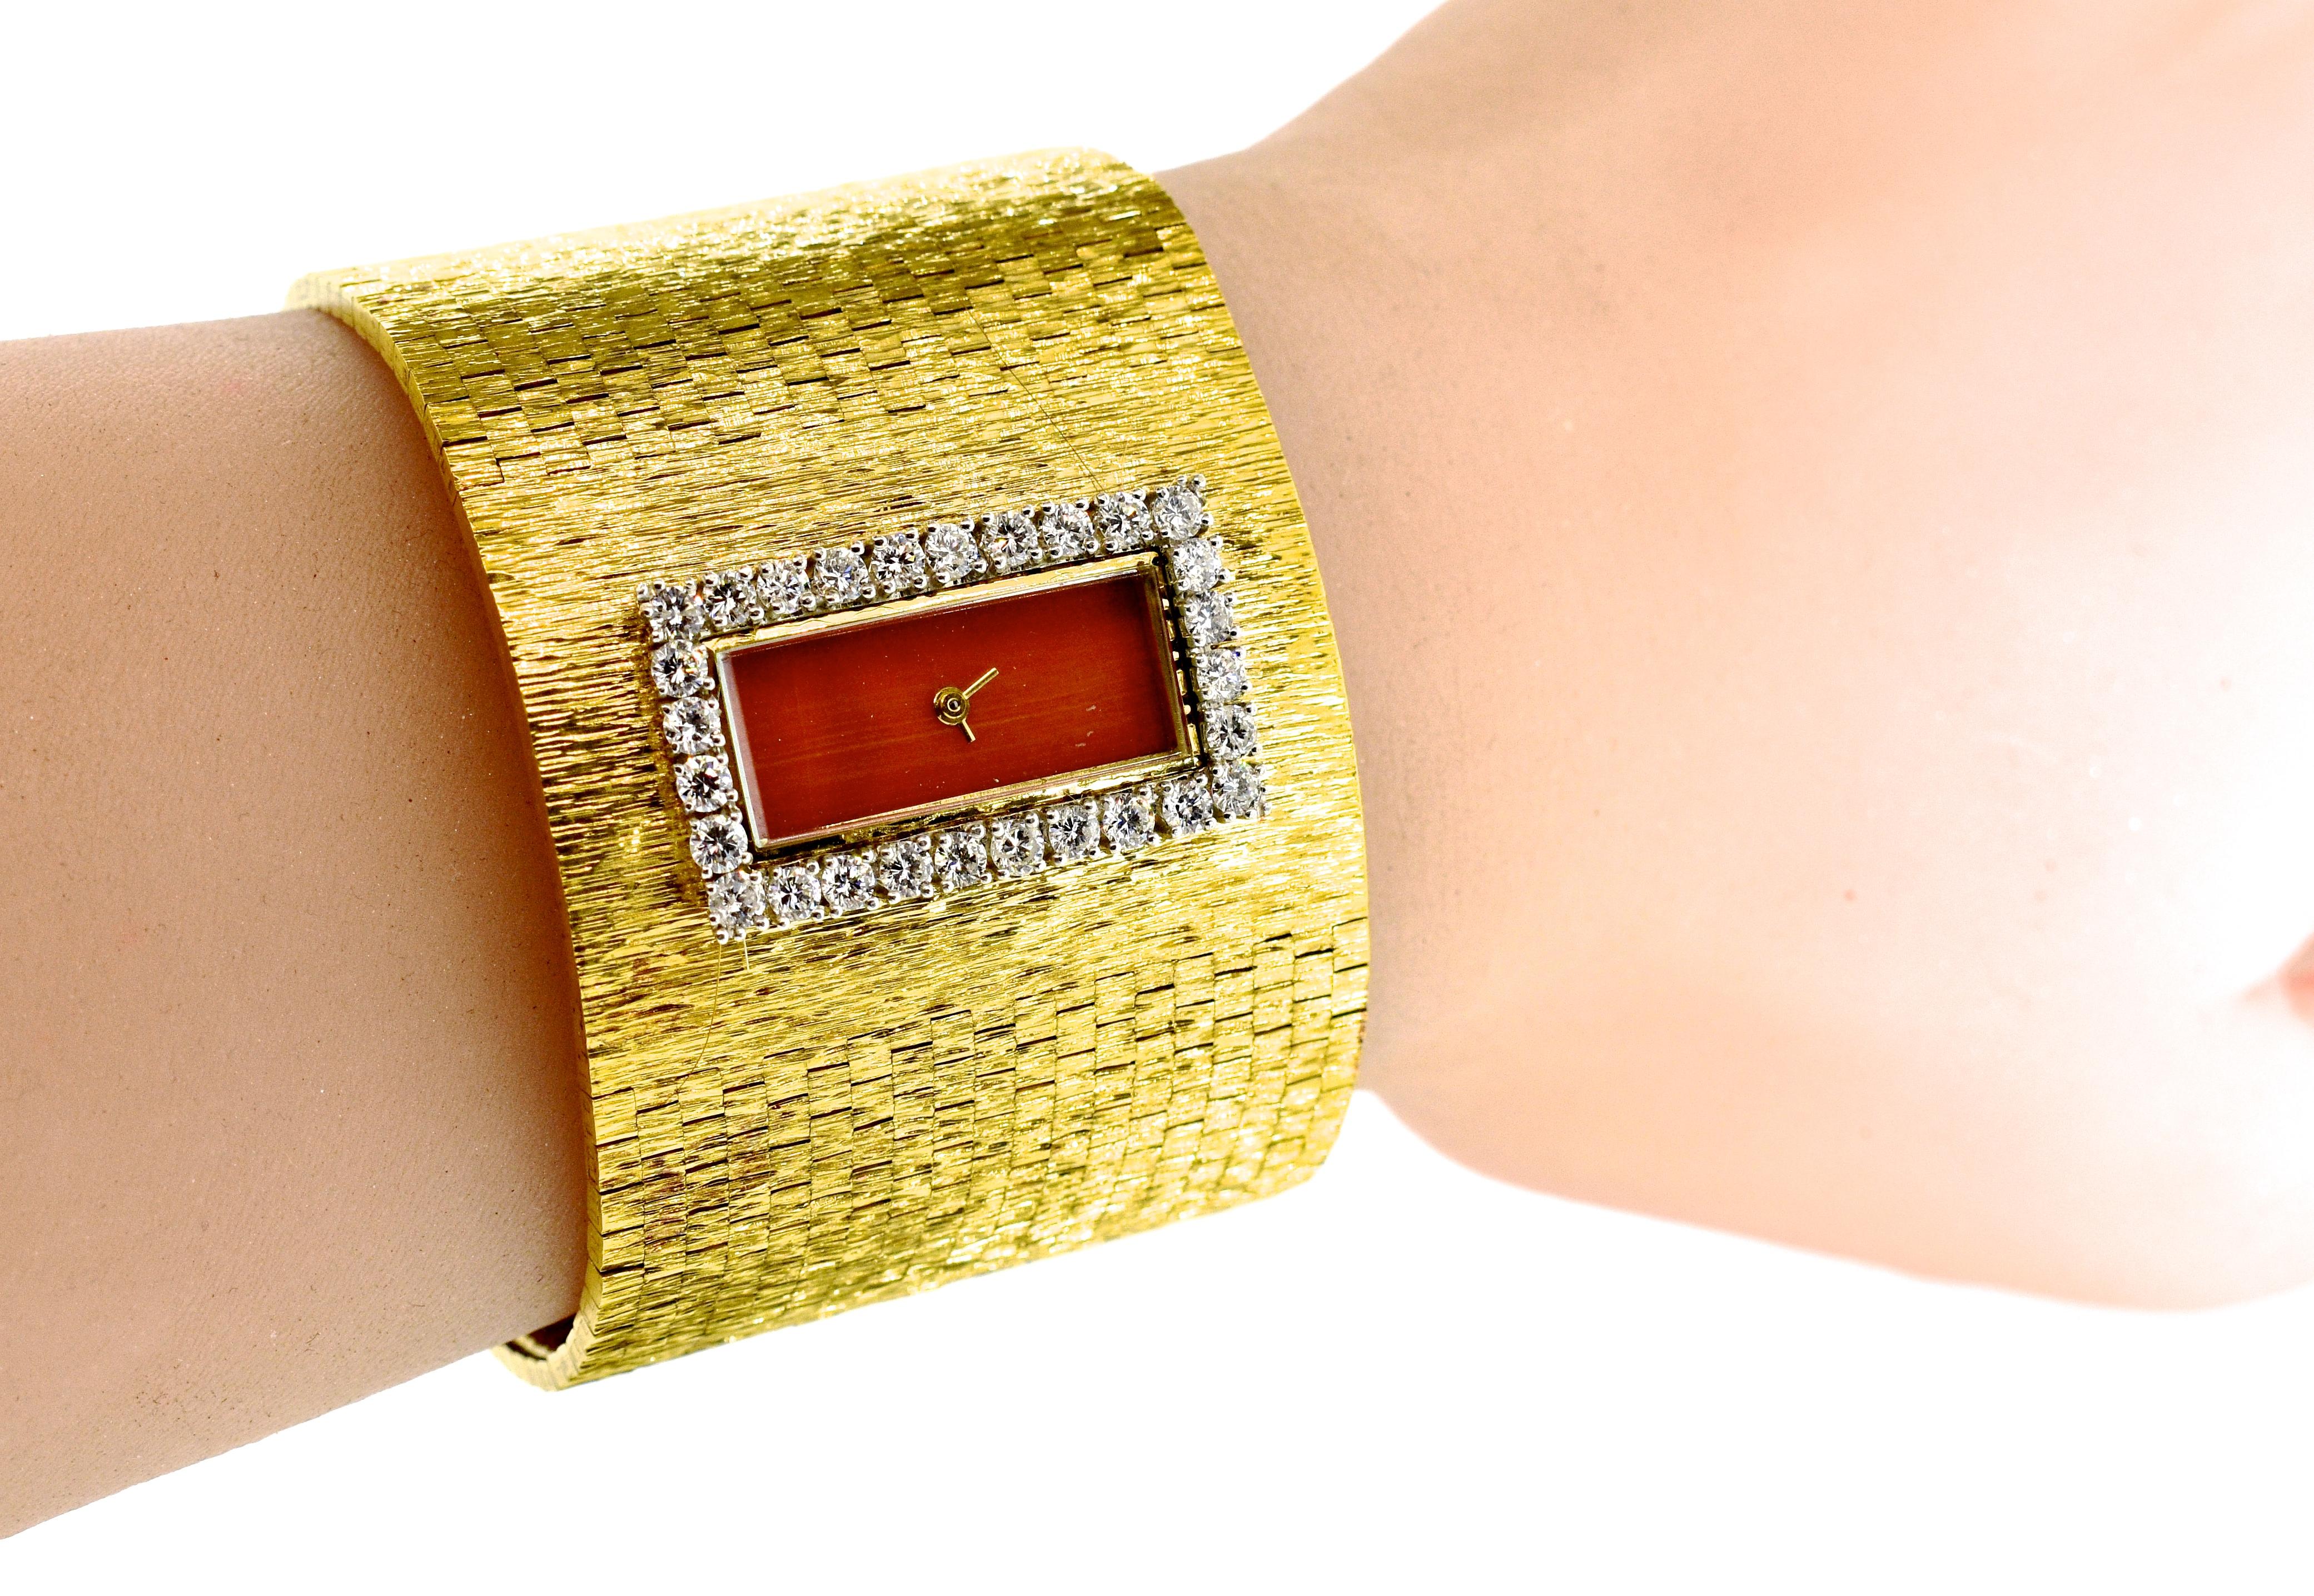 Retro Watch Bracelet with Diamonds and a Coral Dial, Milner London, circa 1965